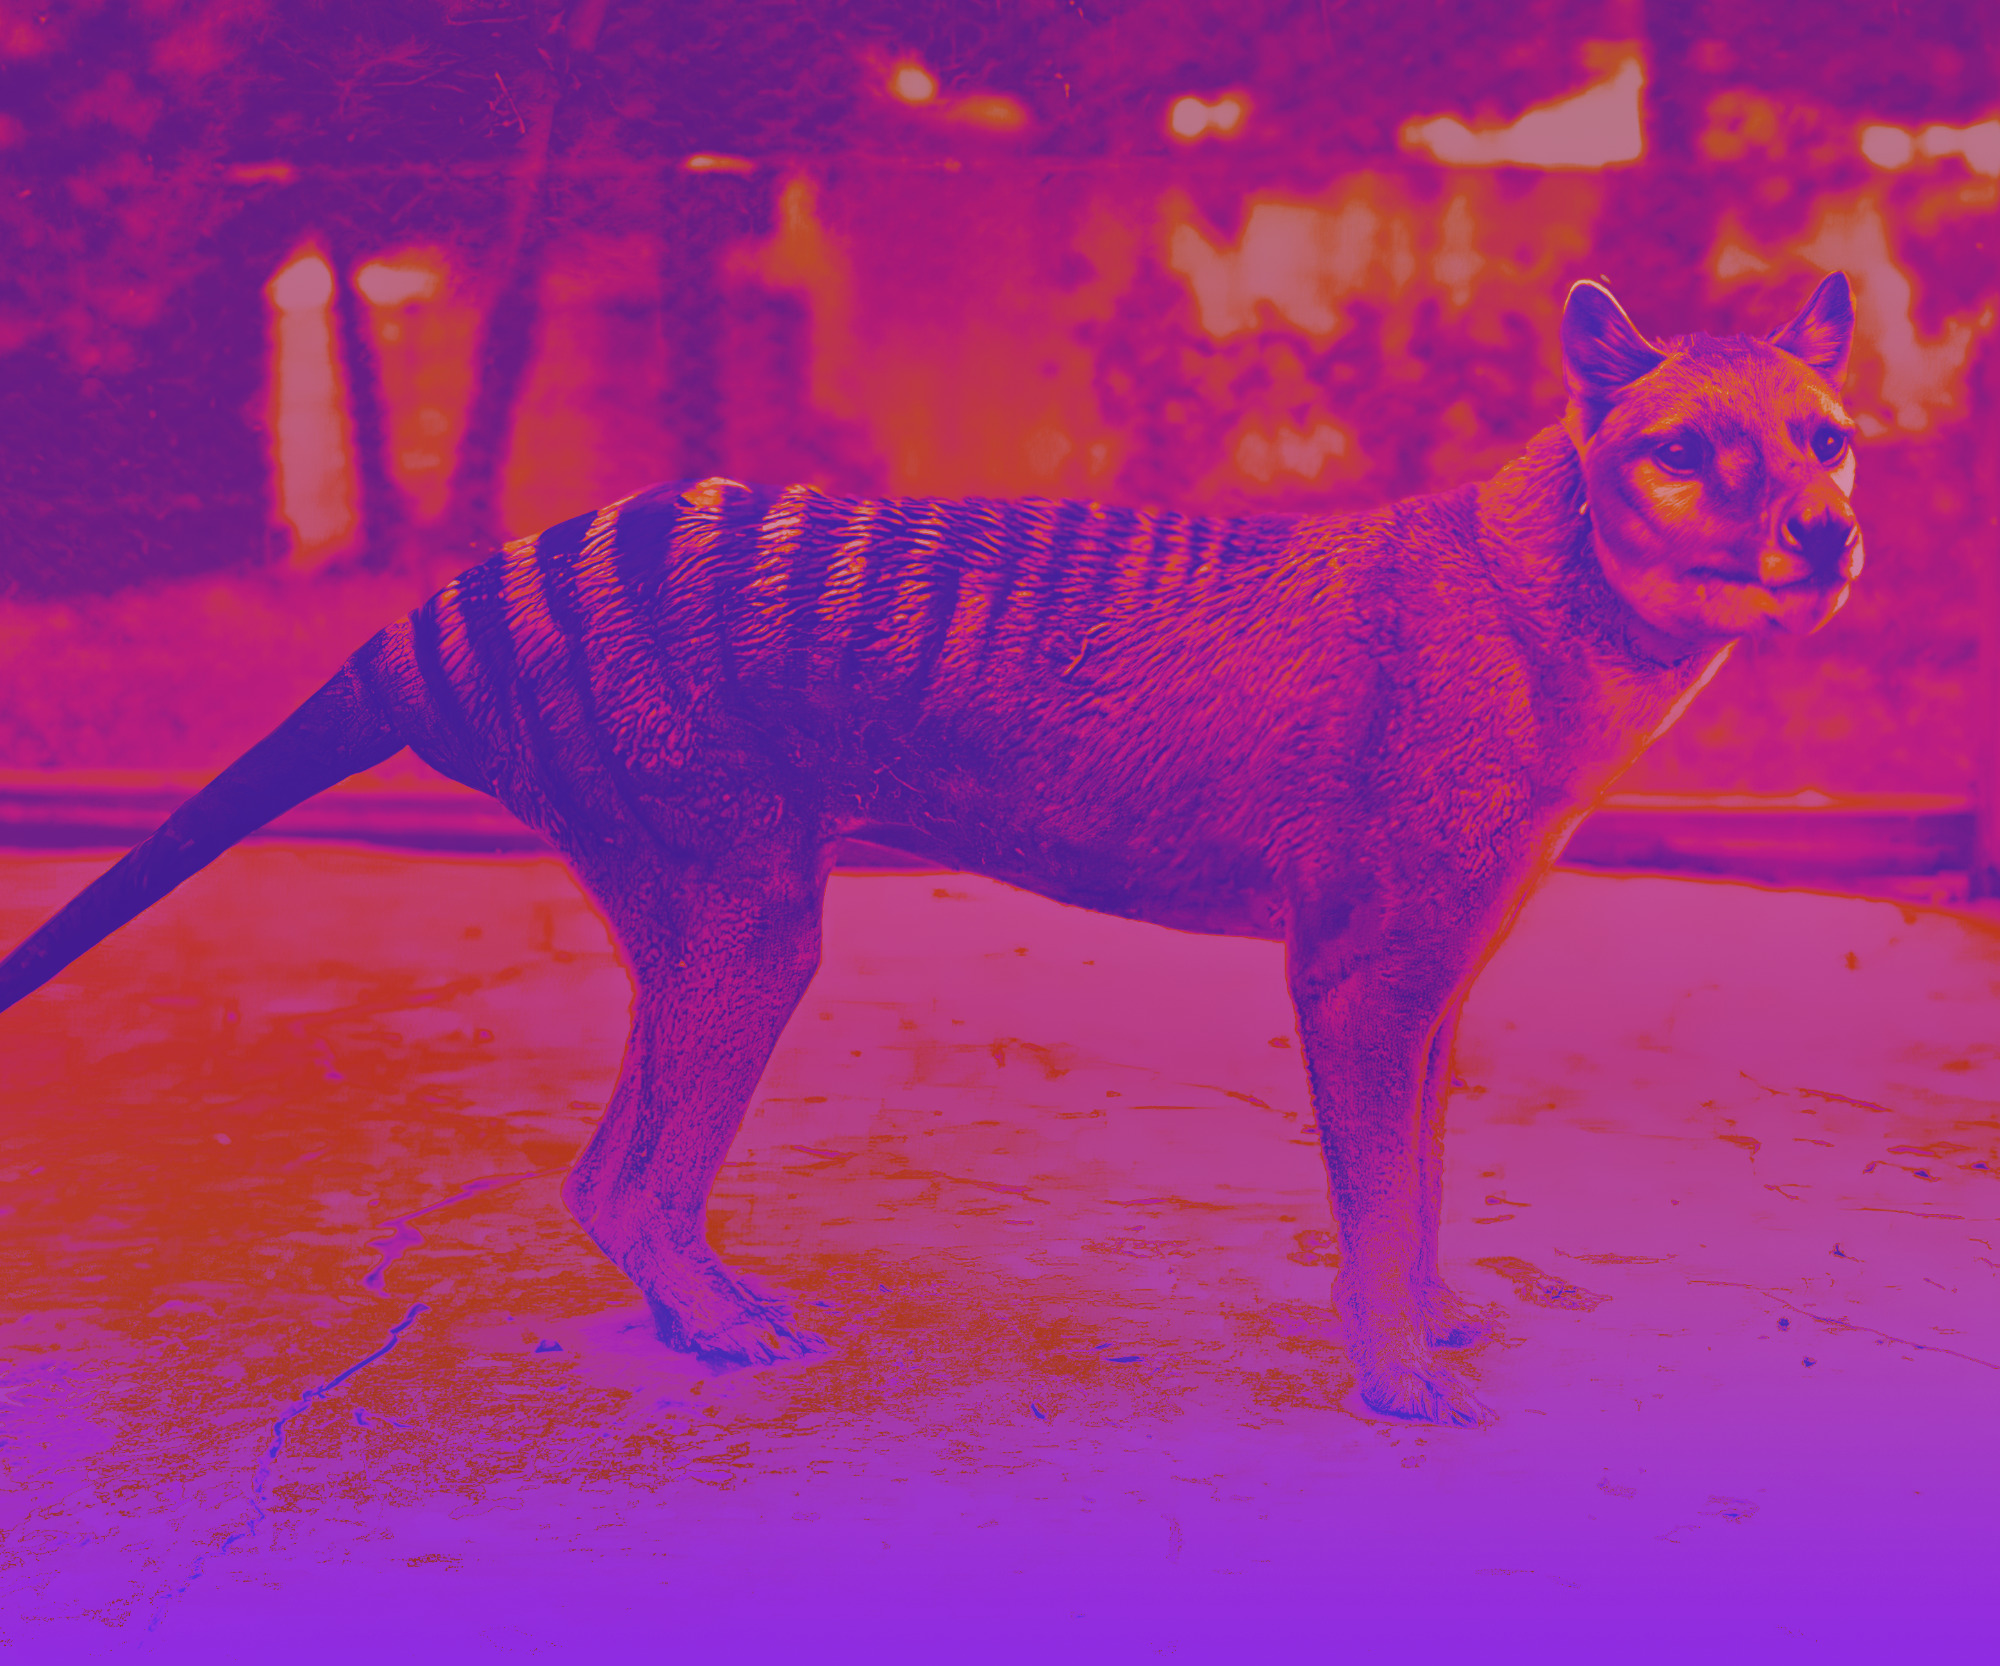 Scientists Are Resurrecting the Tasmanian Tiger from Extinction, Latest